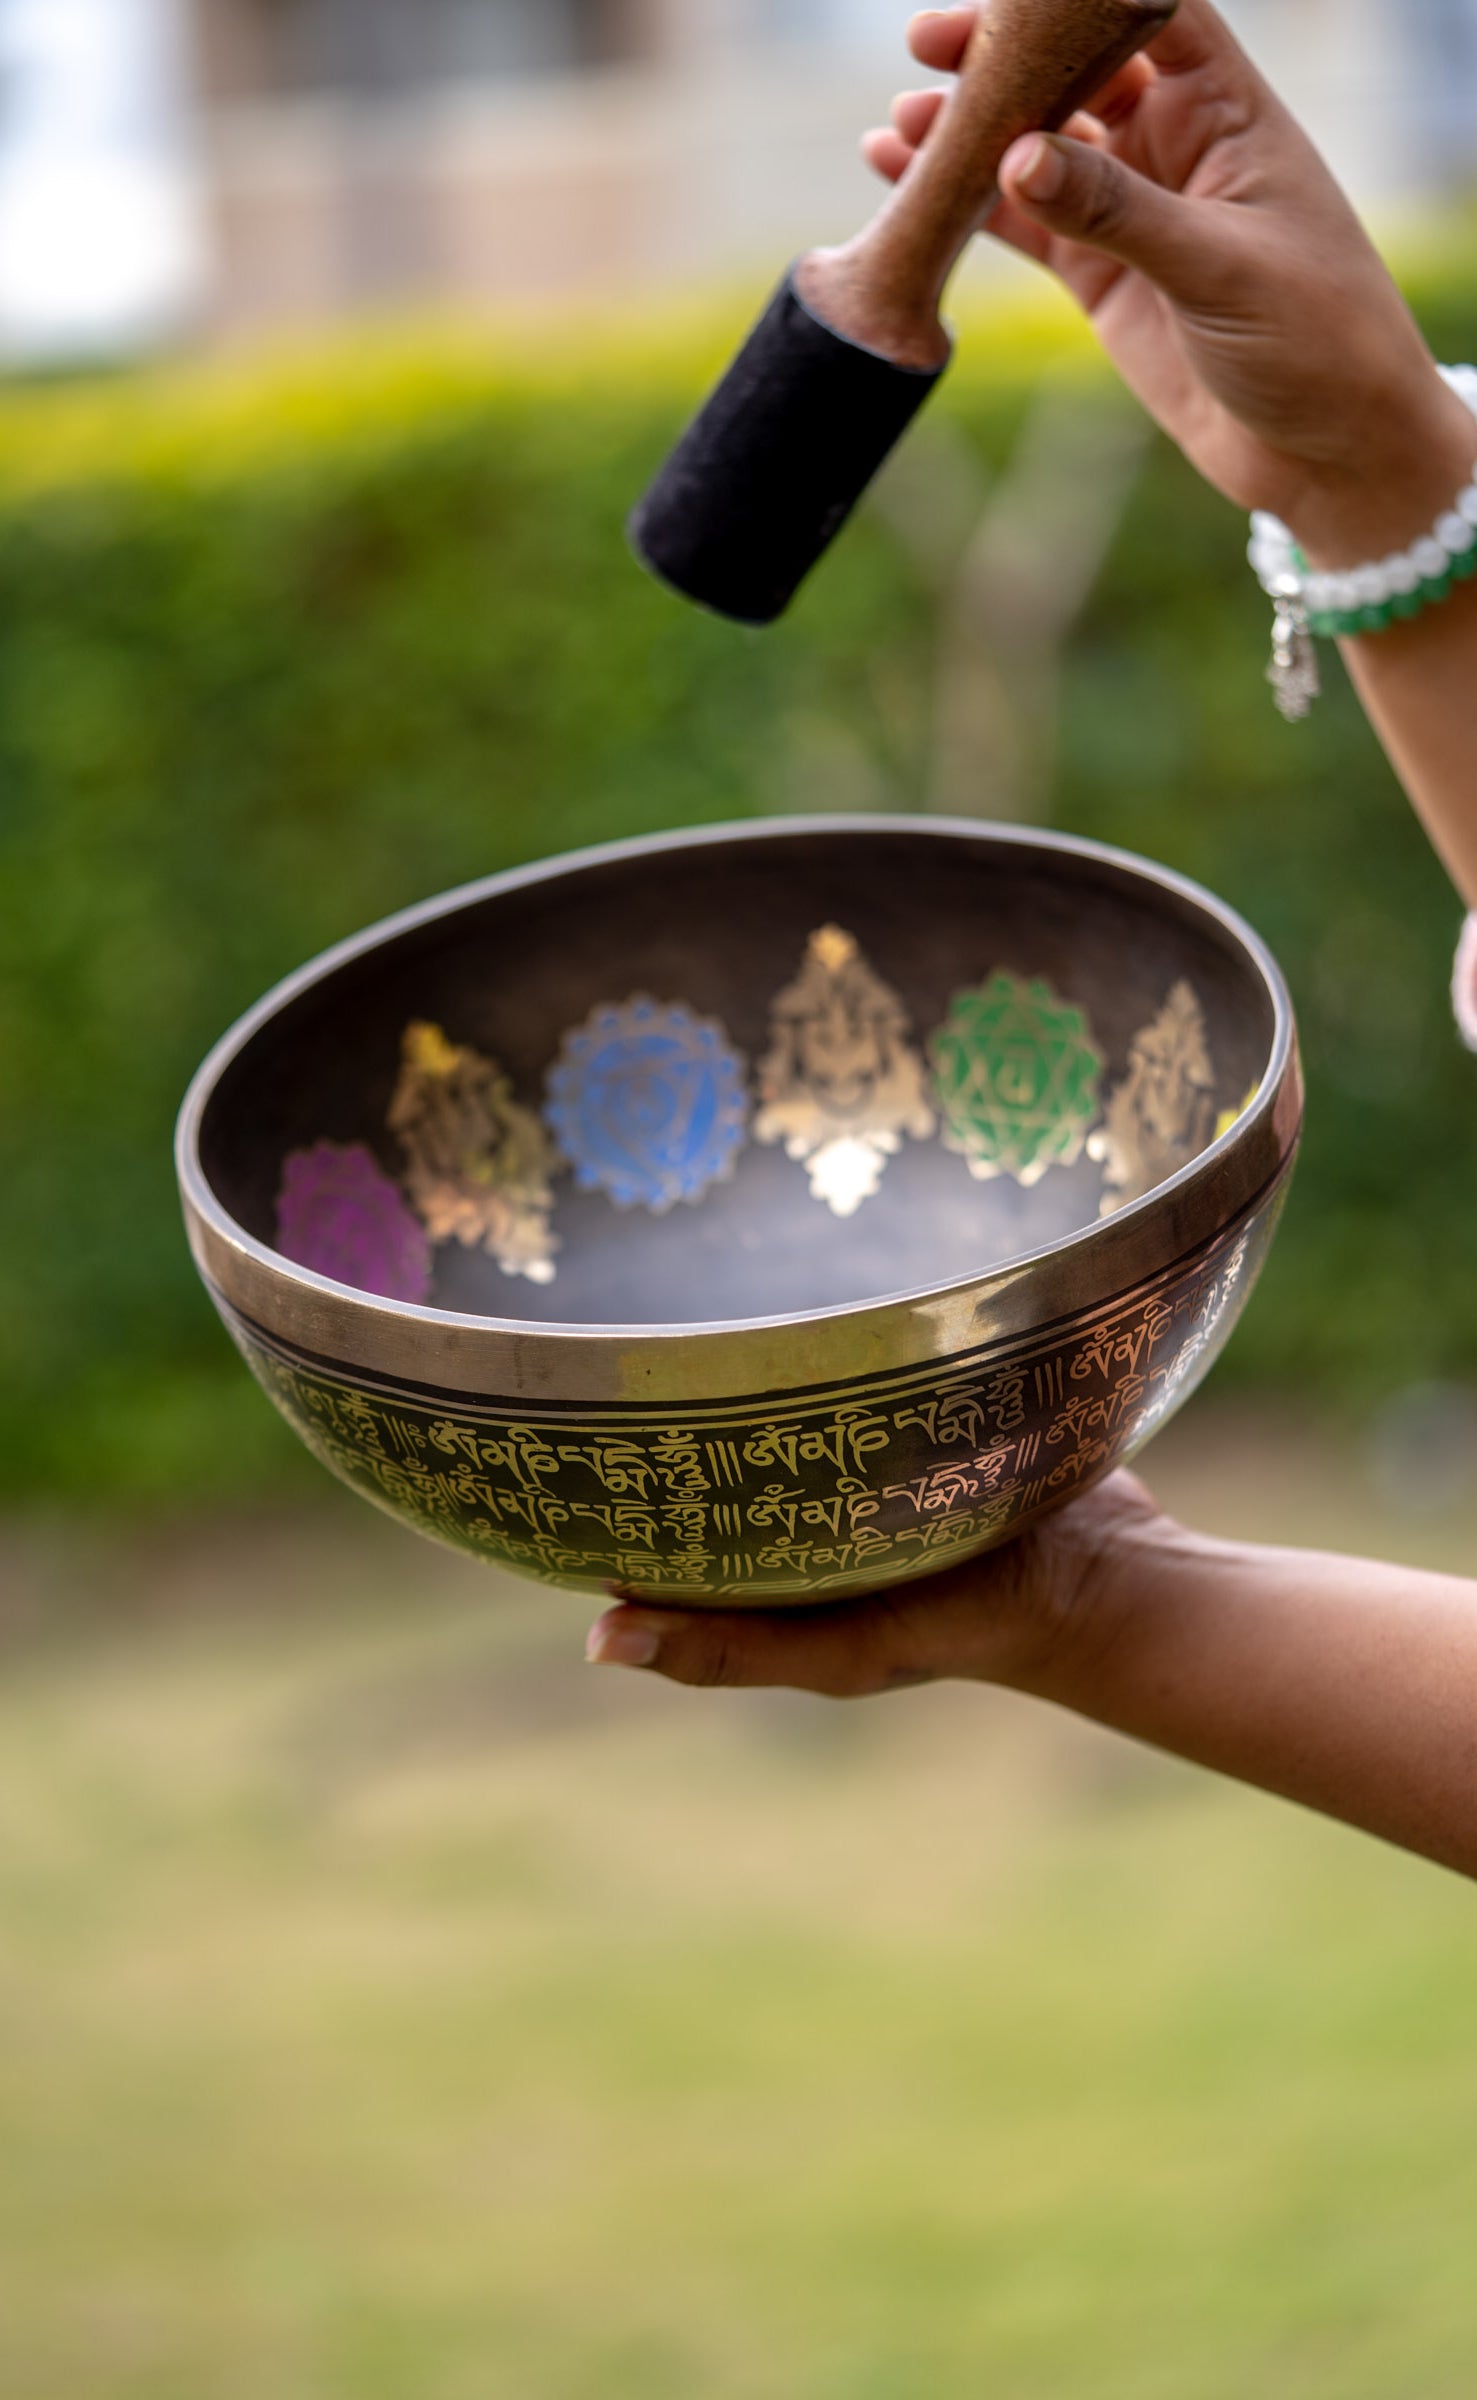 7 Chakra singing bowls can be a helpful tool for relaxation and self-reflection.